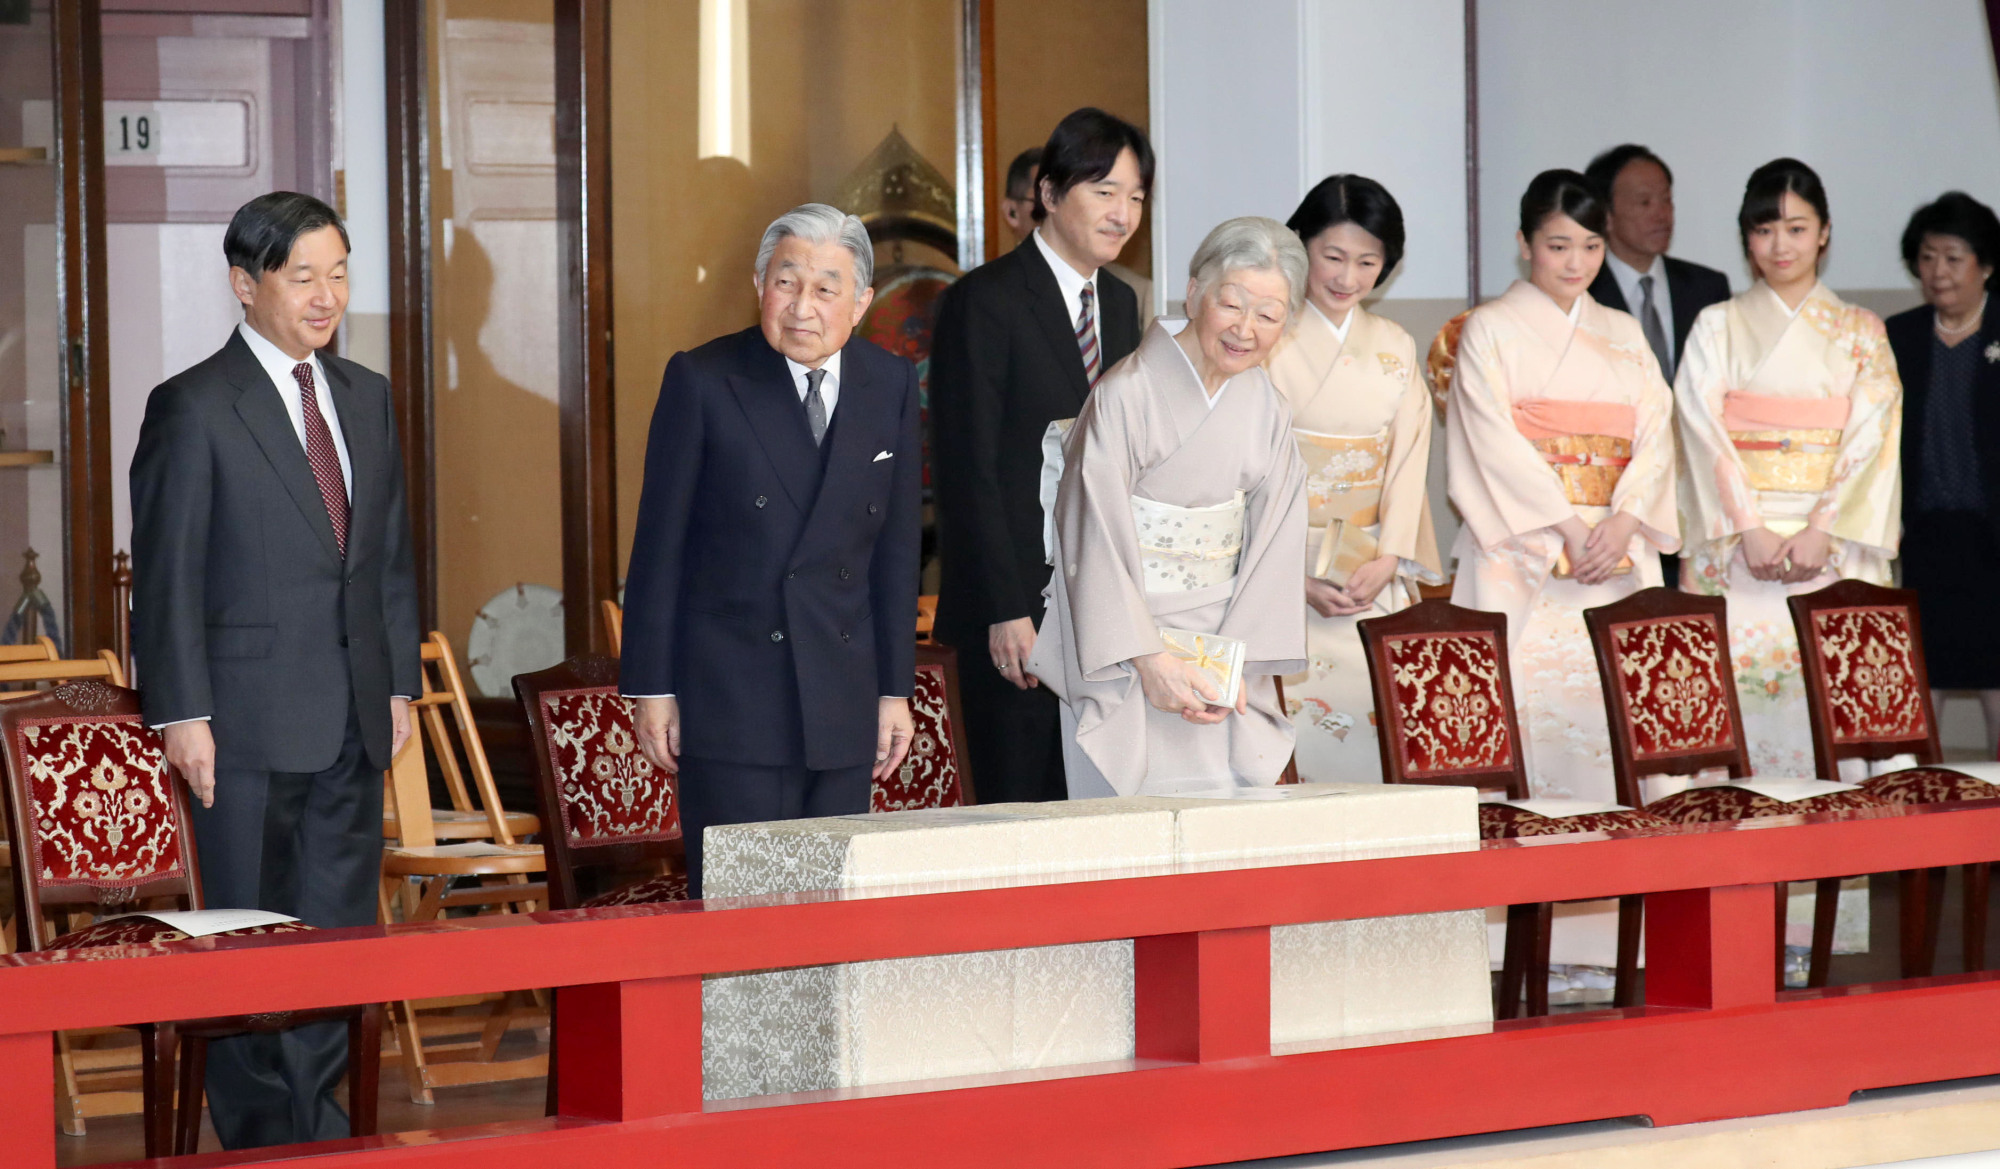 (From left) Crown Prince Naruhito, Emperor Akihito, Prince Akishino, Empress Michiko, Prince Akishino's wife, Princess Kiko, and their two daughters, Princess Kako and Princess Mako, listen to gagaku, Japan's ancient court music, at a concert at the Imperial Palace earlier this month. | KYODO